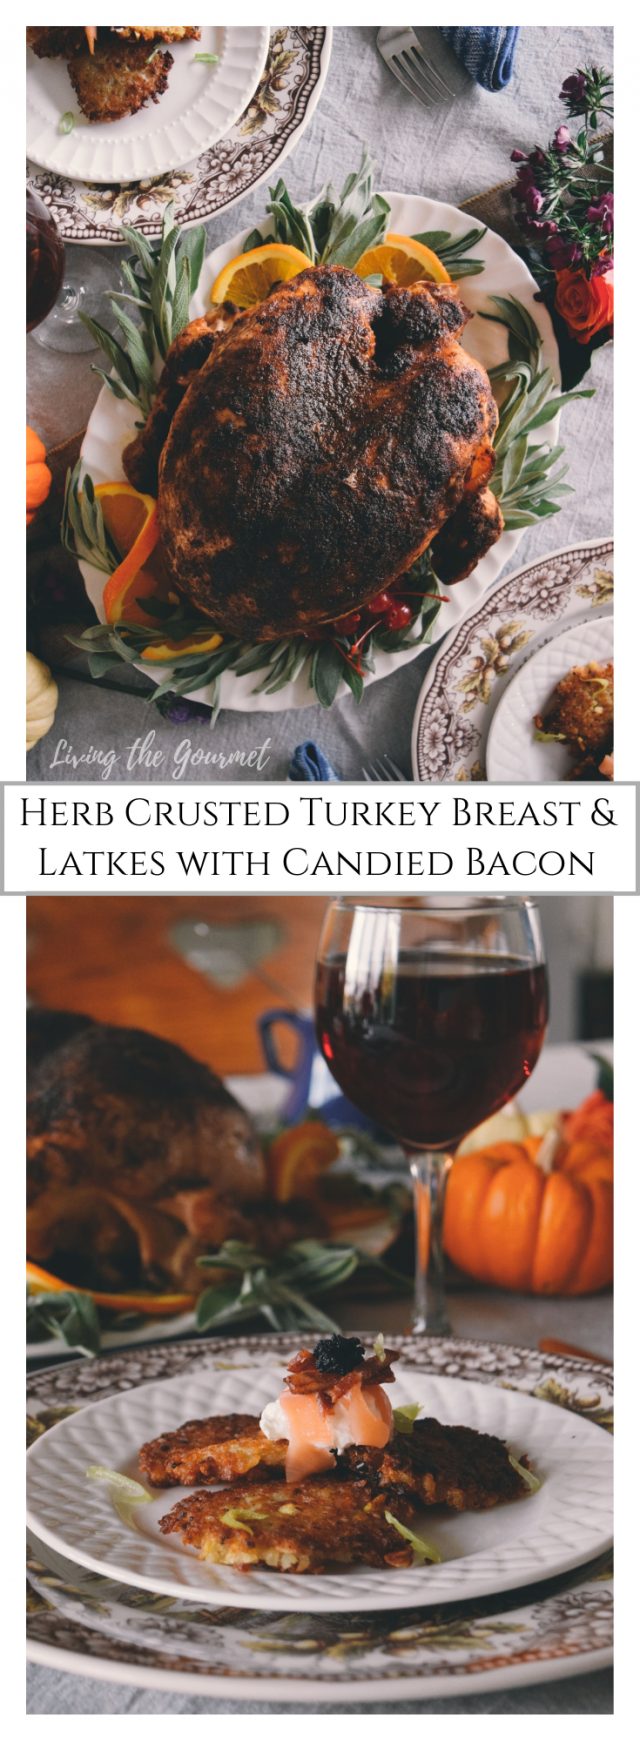 Herb Crusted Turkey Breast & Latkes with Candied Bacon - Living The Gourmet